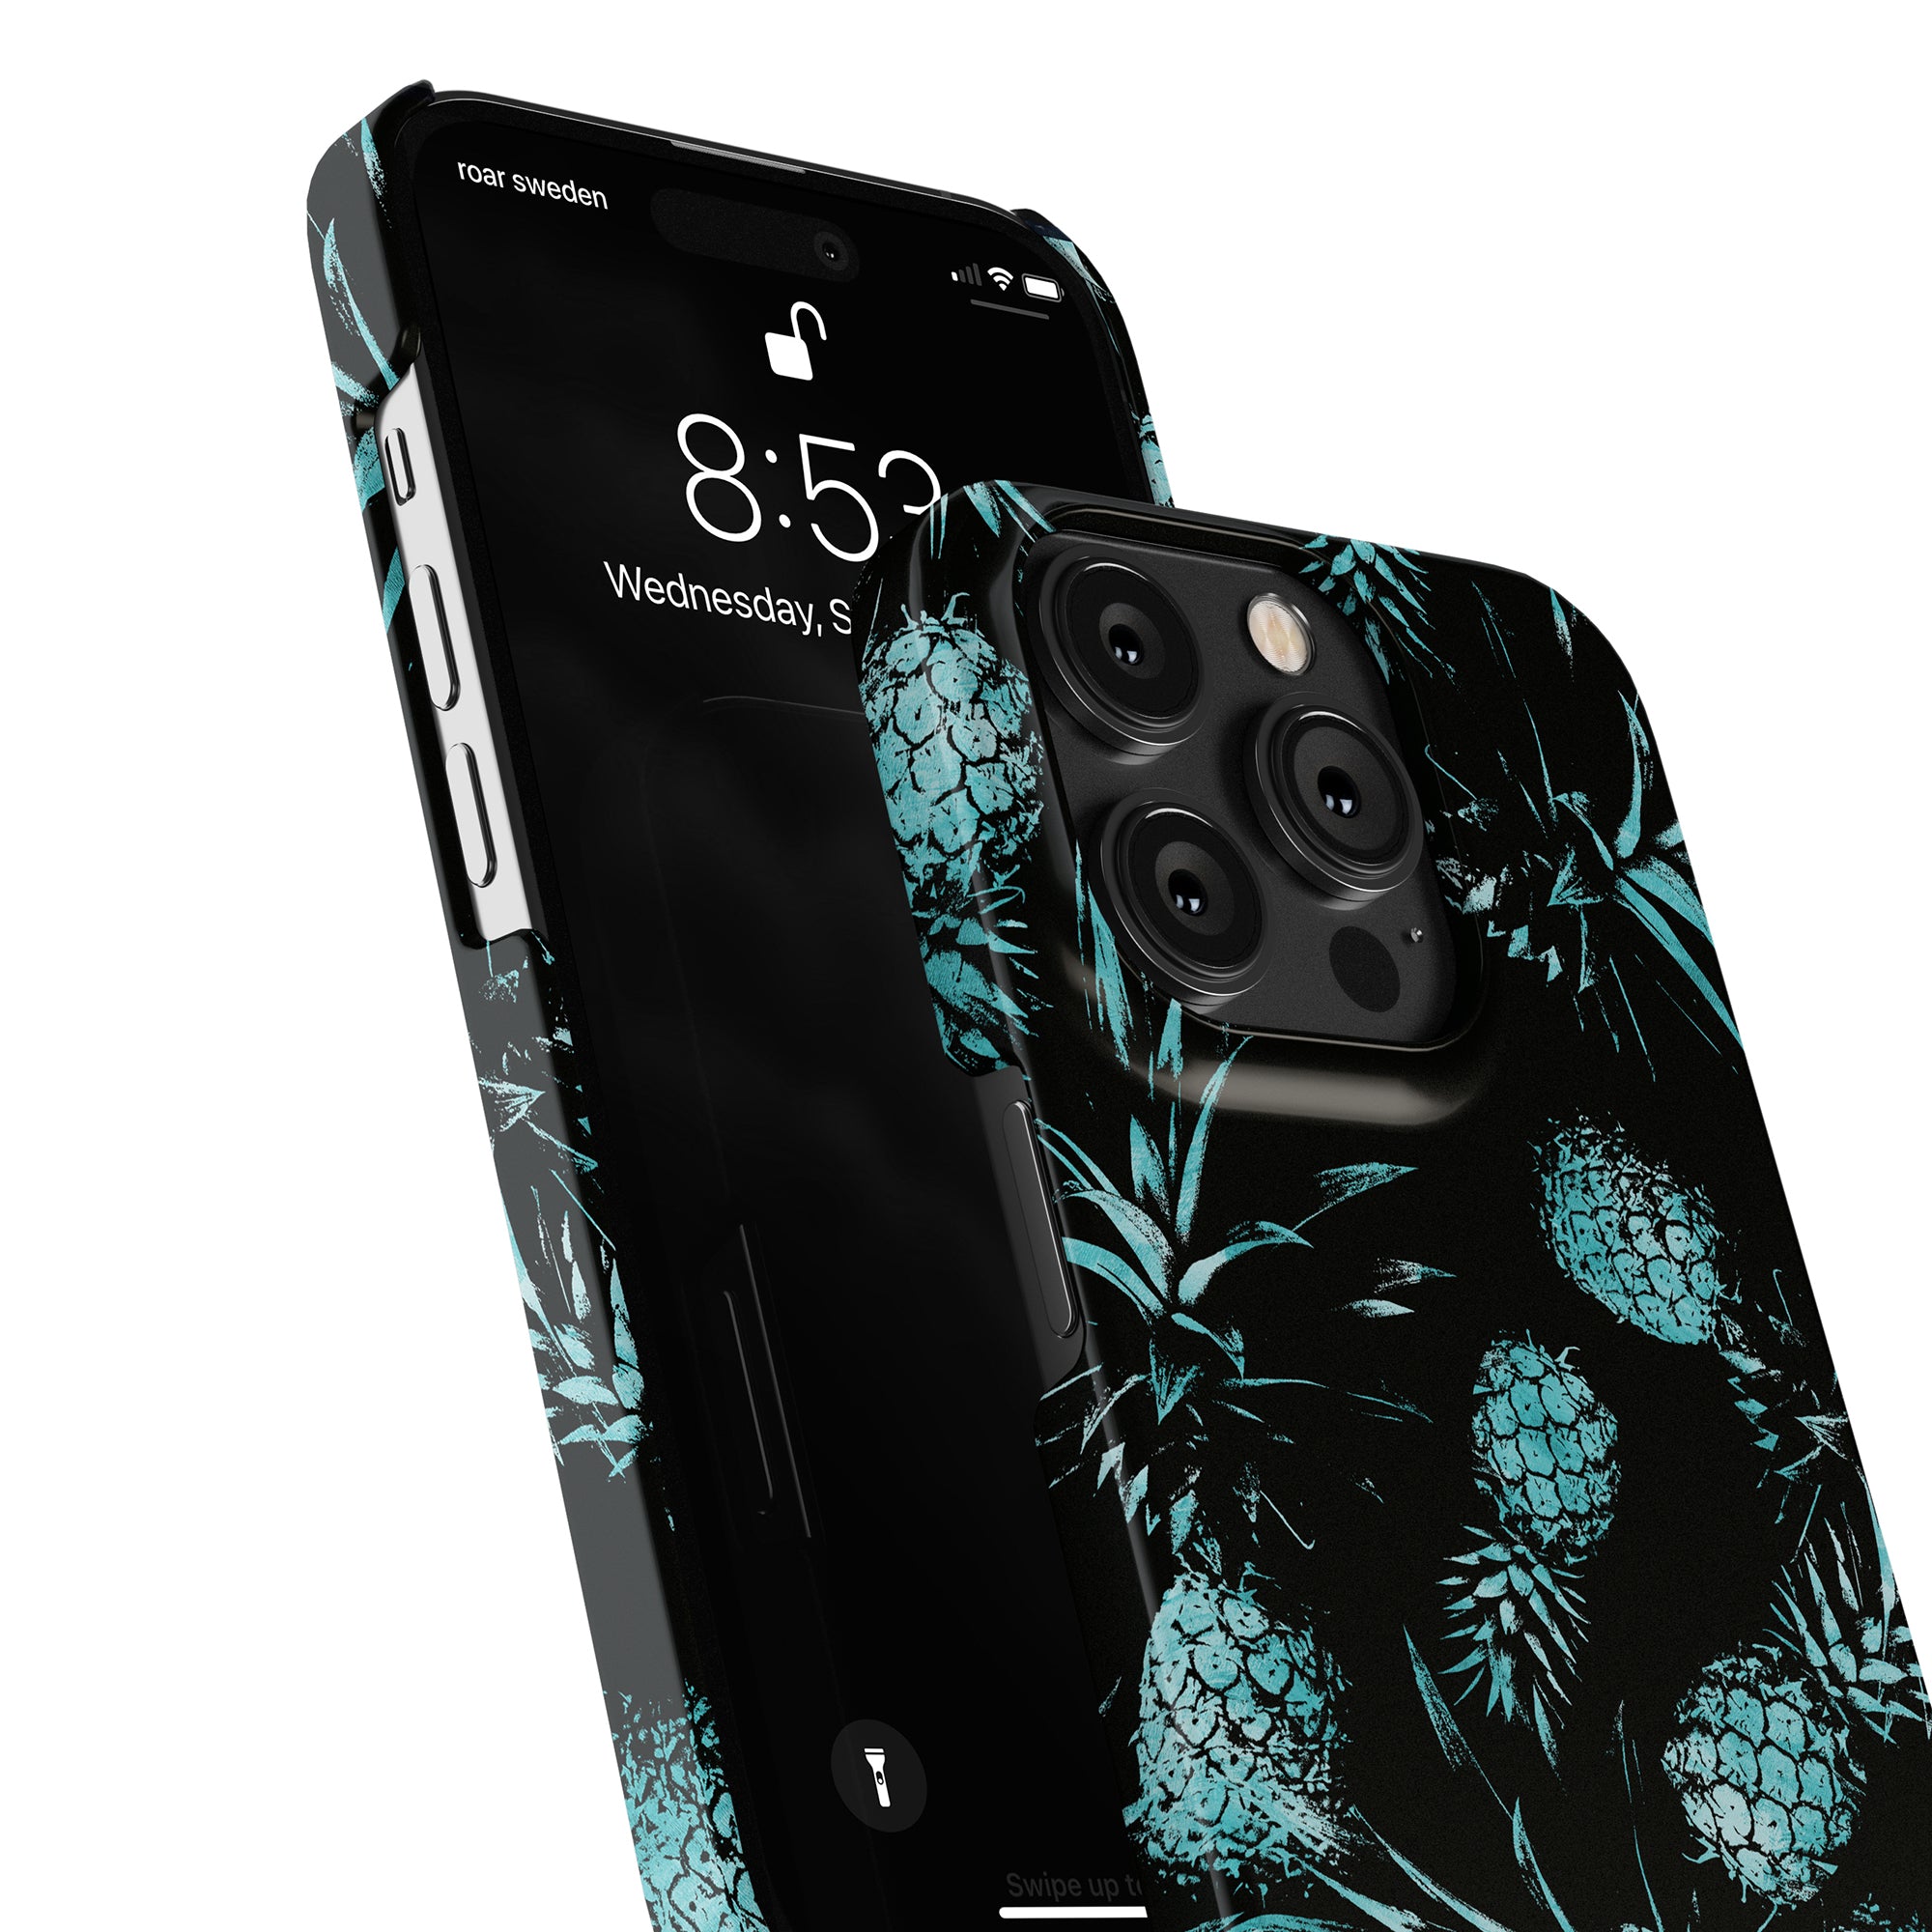 Close-up of a smartphone with a Turquoise Pineapples - Slim case from the Exotic Collection, featuring black and turquoise pineapples. The screen displays the time as 8:52 and date as Wednesday, September 25.